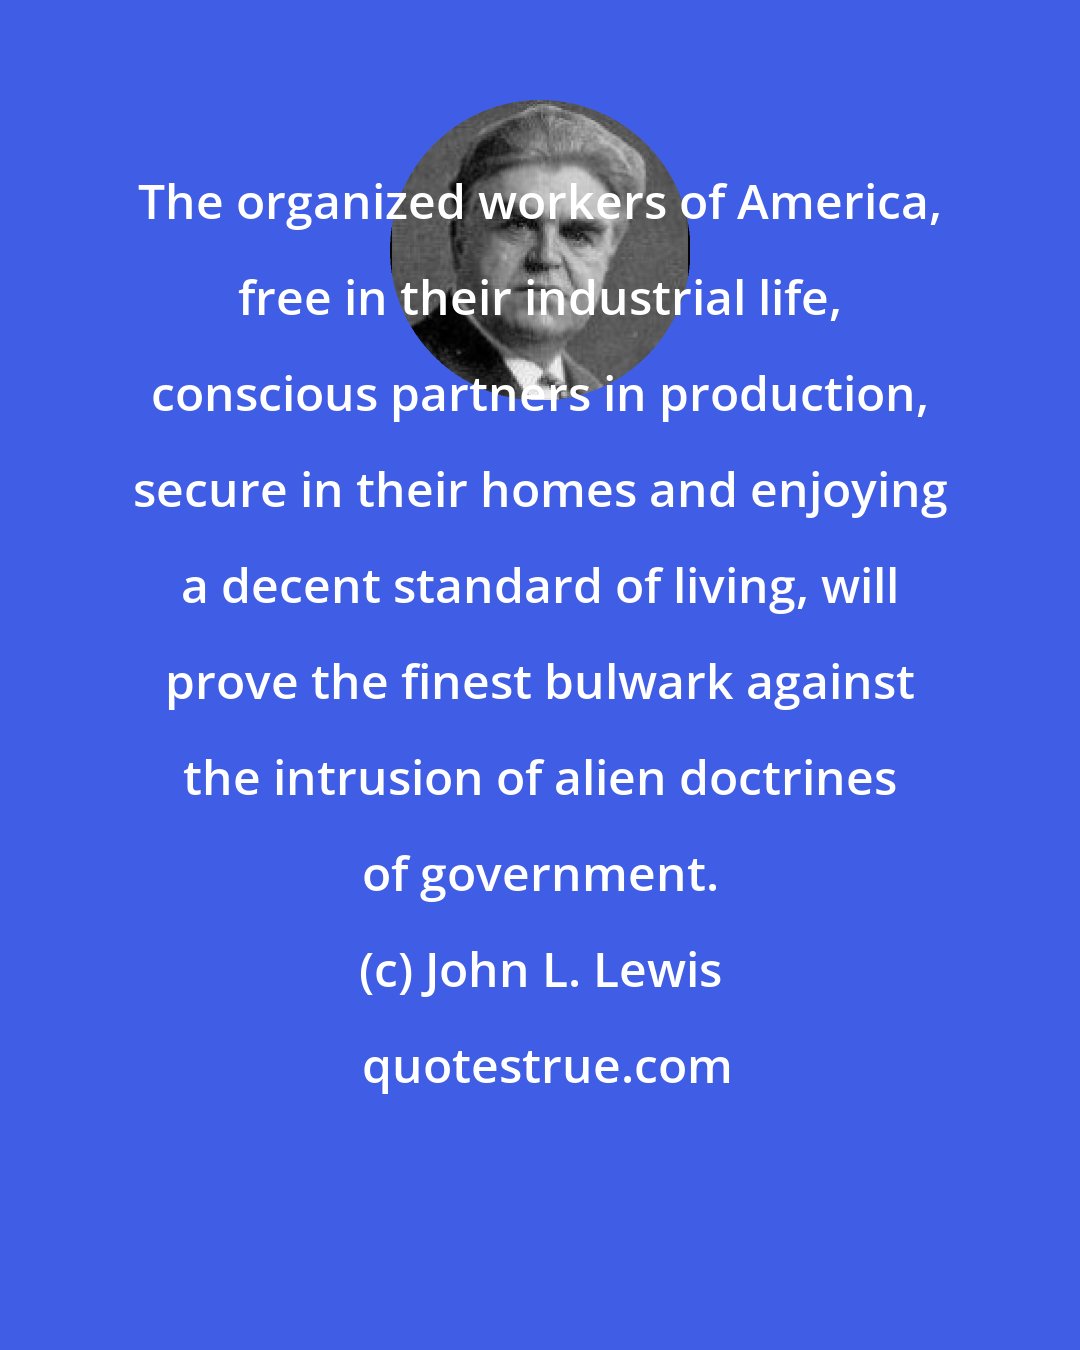 John L. Lewis: The organized workers of America, free in their industrial life, conscious partners in production, secure in their homes and enjoying a decent standard of living, will prove the finest bulwark against the intrusion of alien doctrines of government.